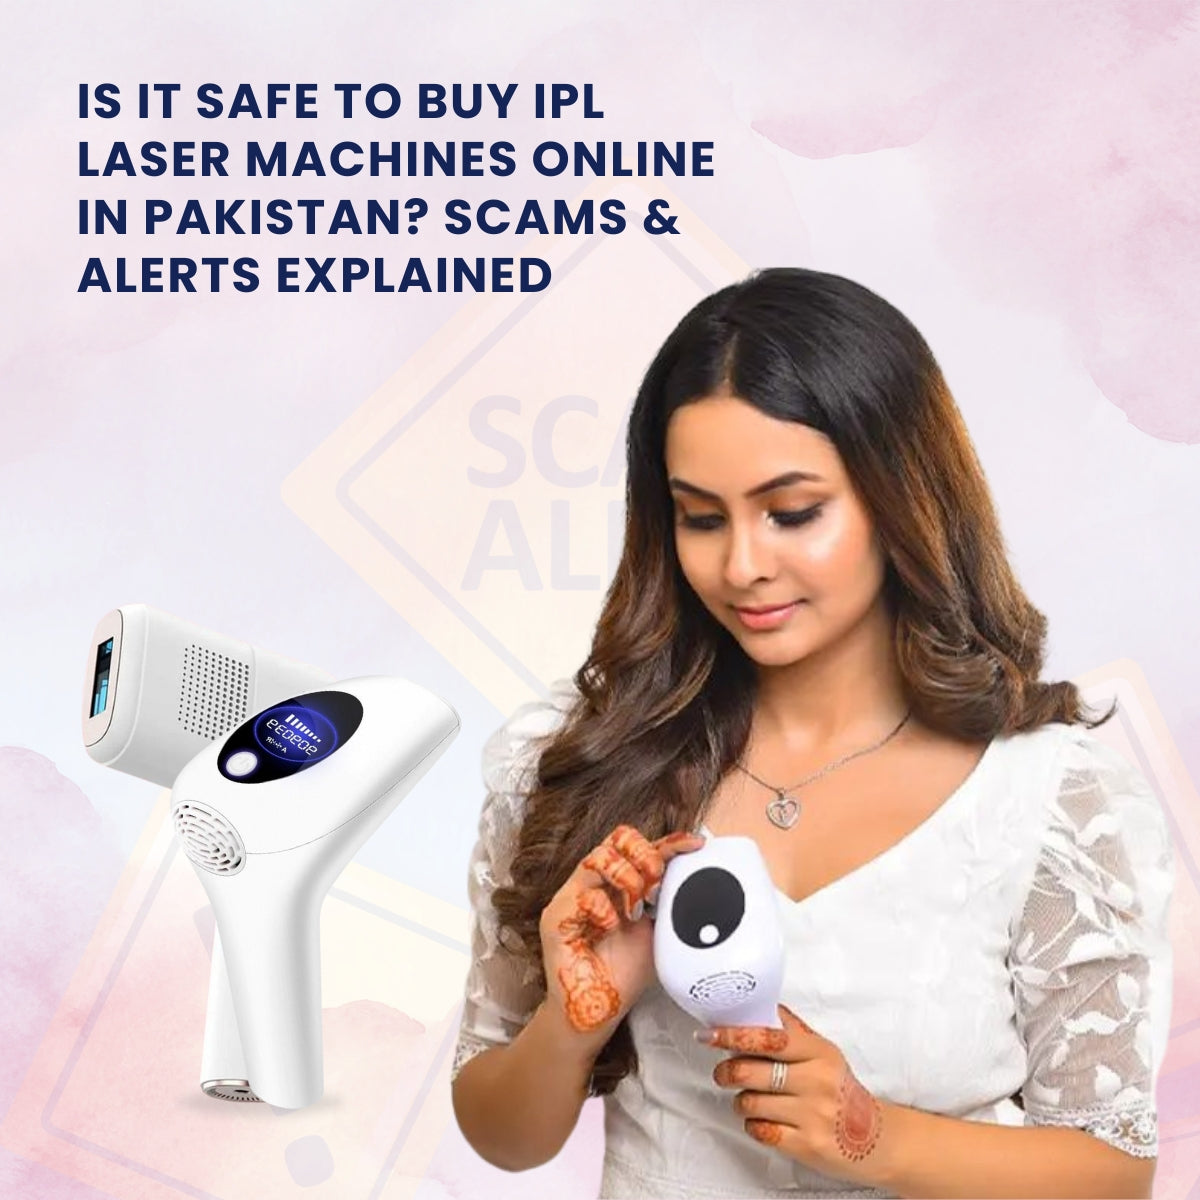 Is it safe to buy Ipl laser machines online in Pakistan? Scams & Alerts Explained